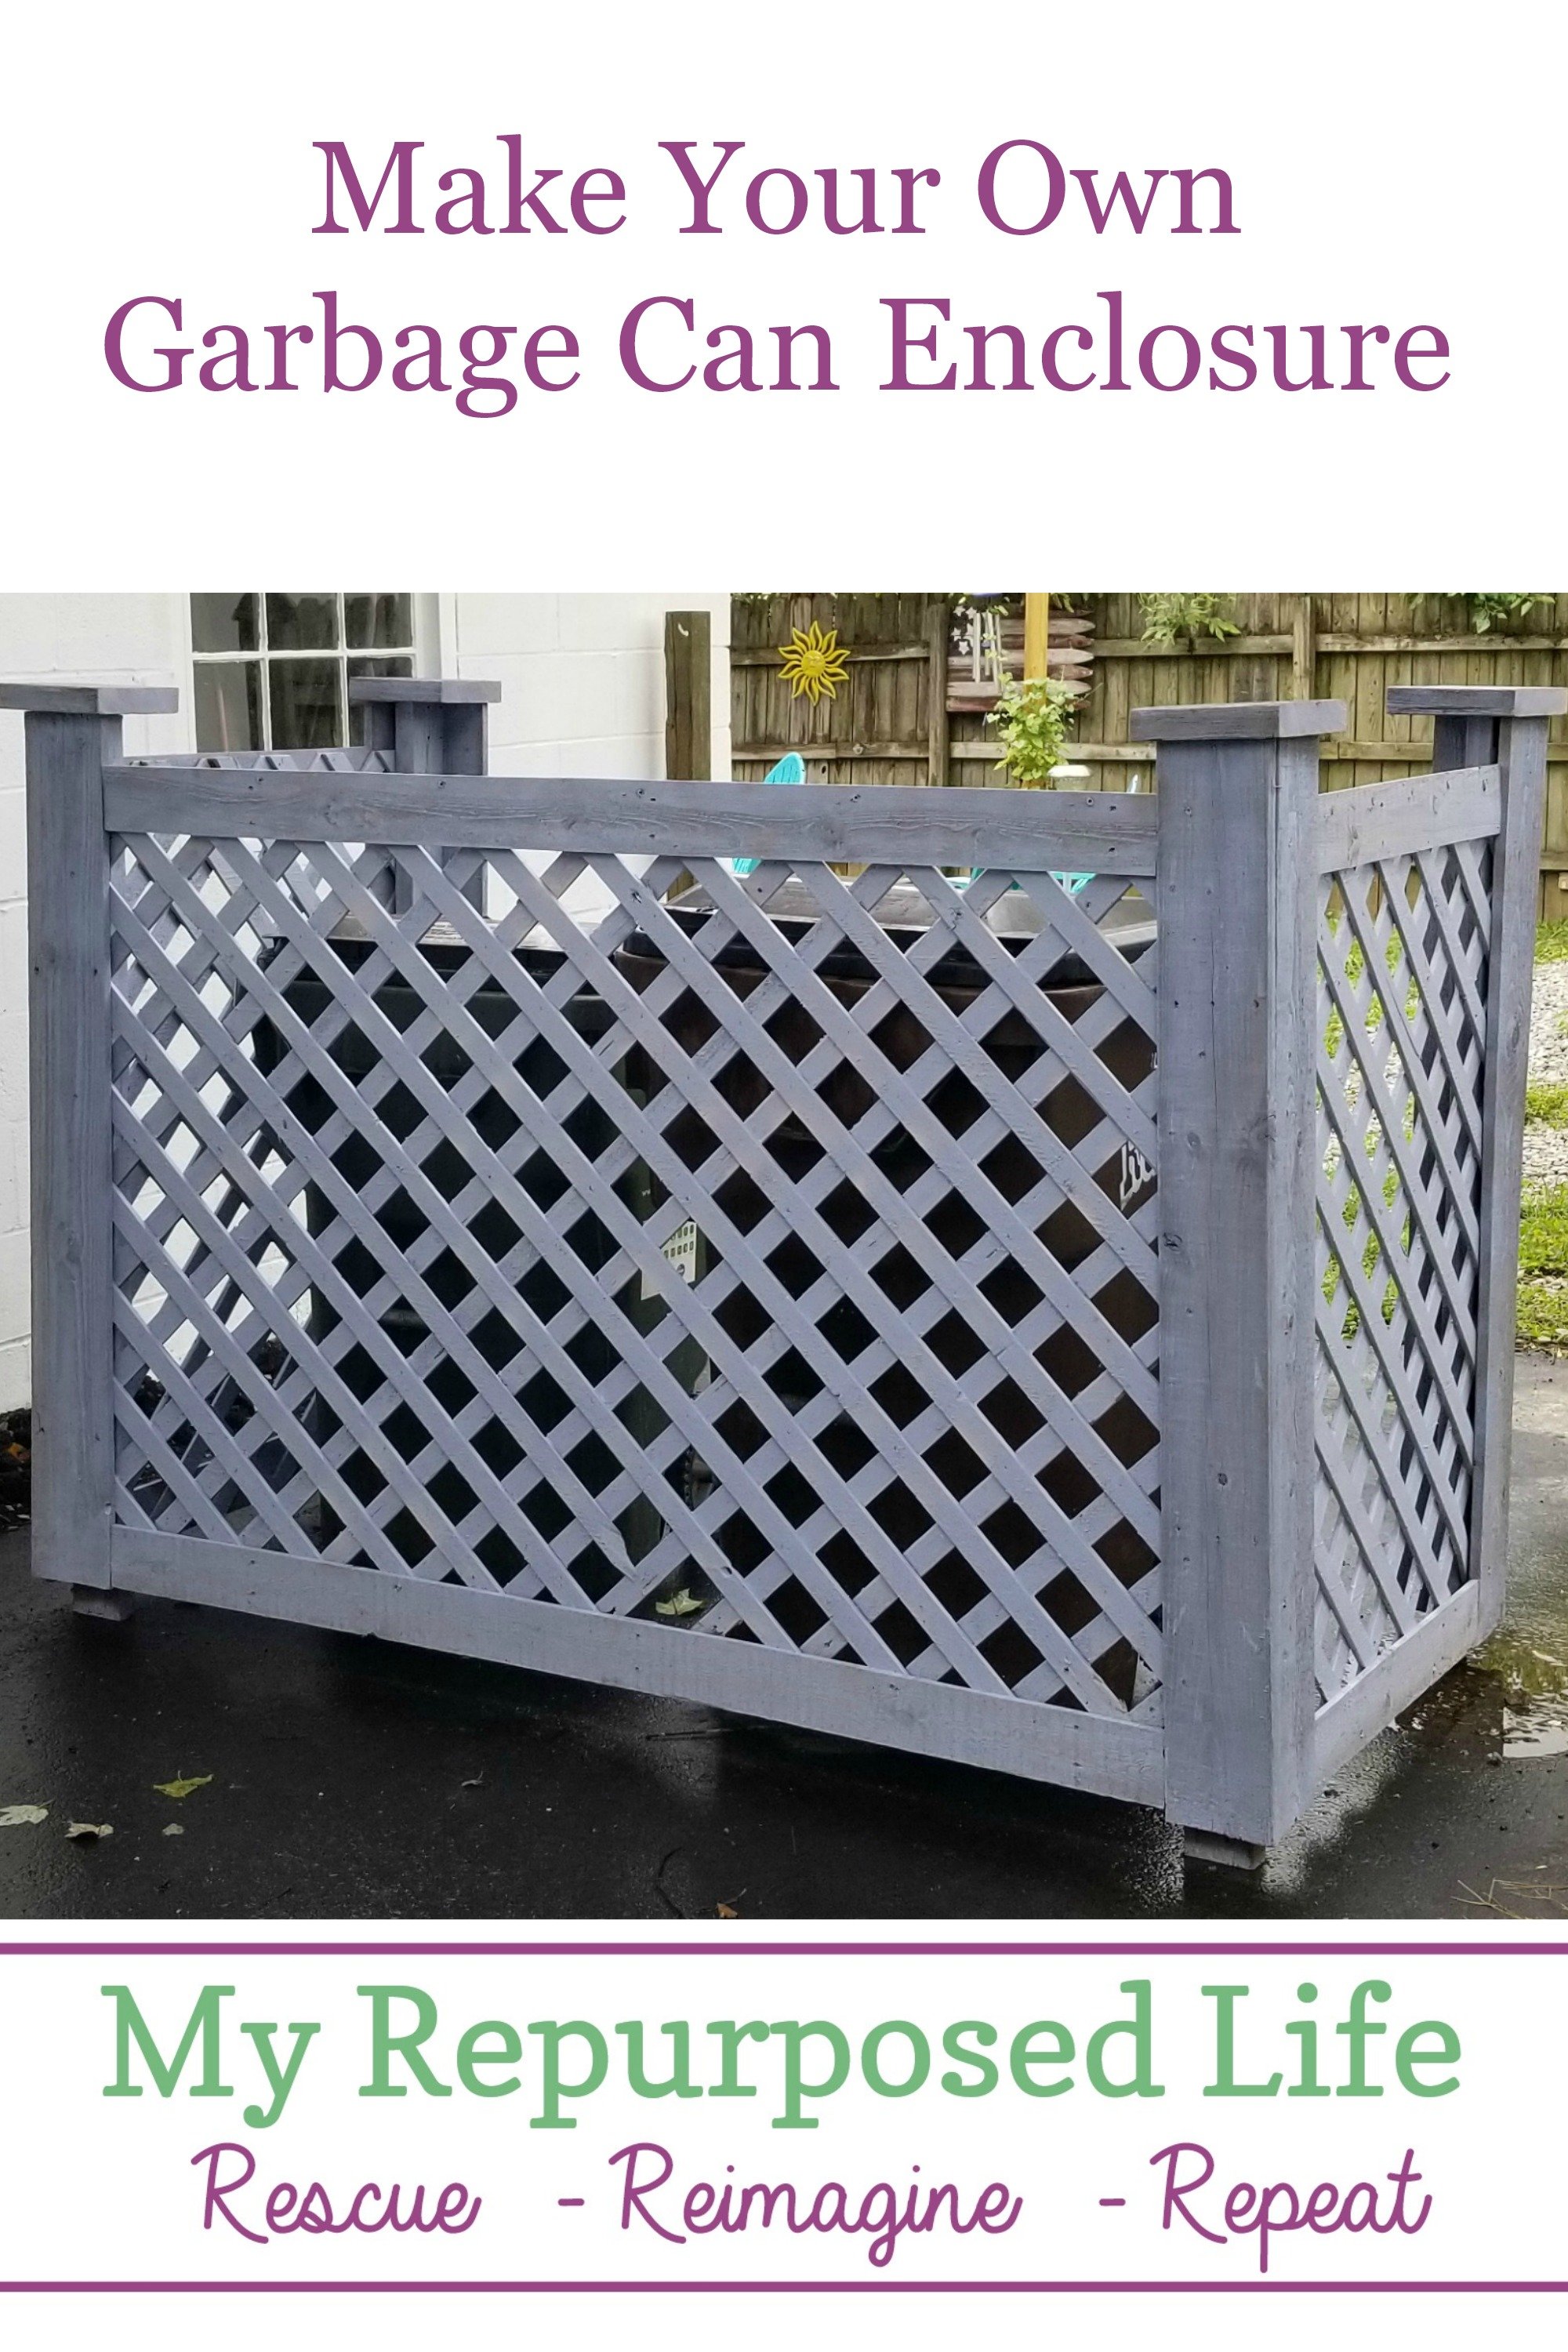 Make your own garbage can enclosure or trash can corral. Improve your curb appeal by hiding those unsightly wastebins! #MyRepurposedLife #garbagecan #curbappeal #eyesore #diy #tutorial via @repurposedlife